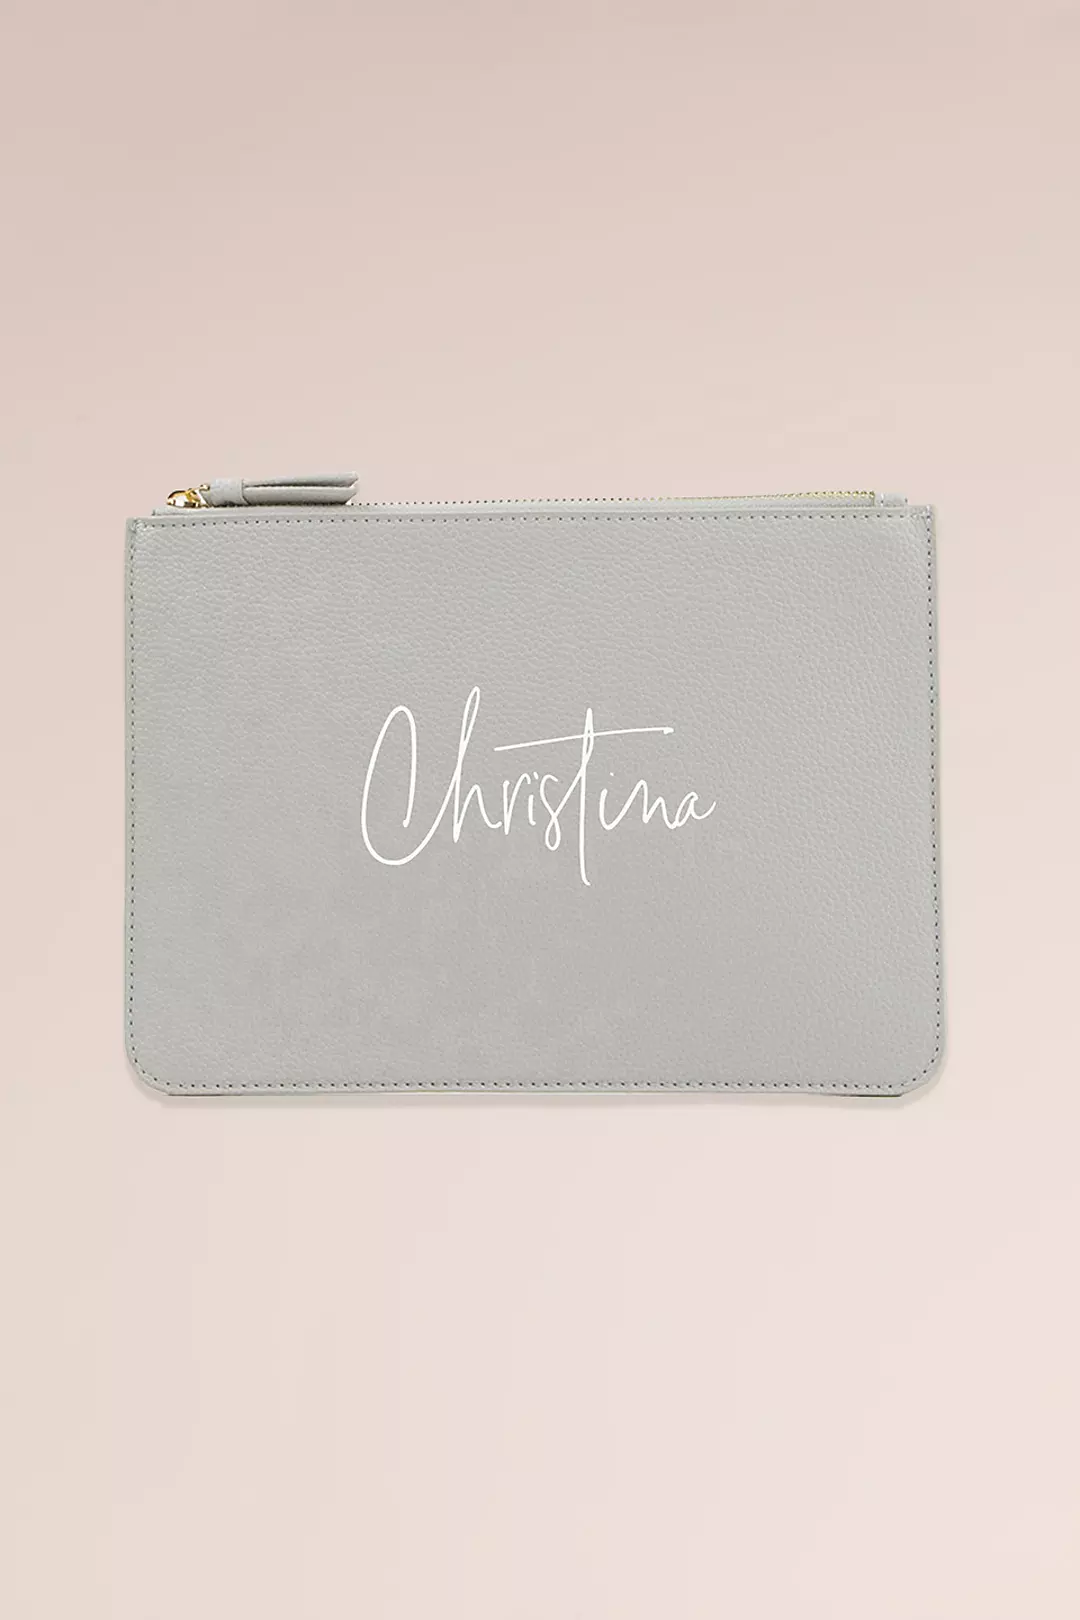 Personalized Vegan Leather Clutch Bag Image